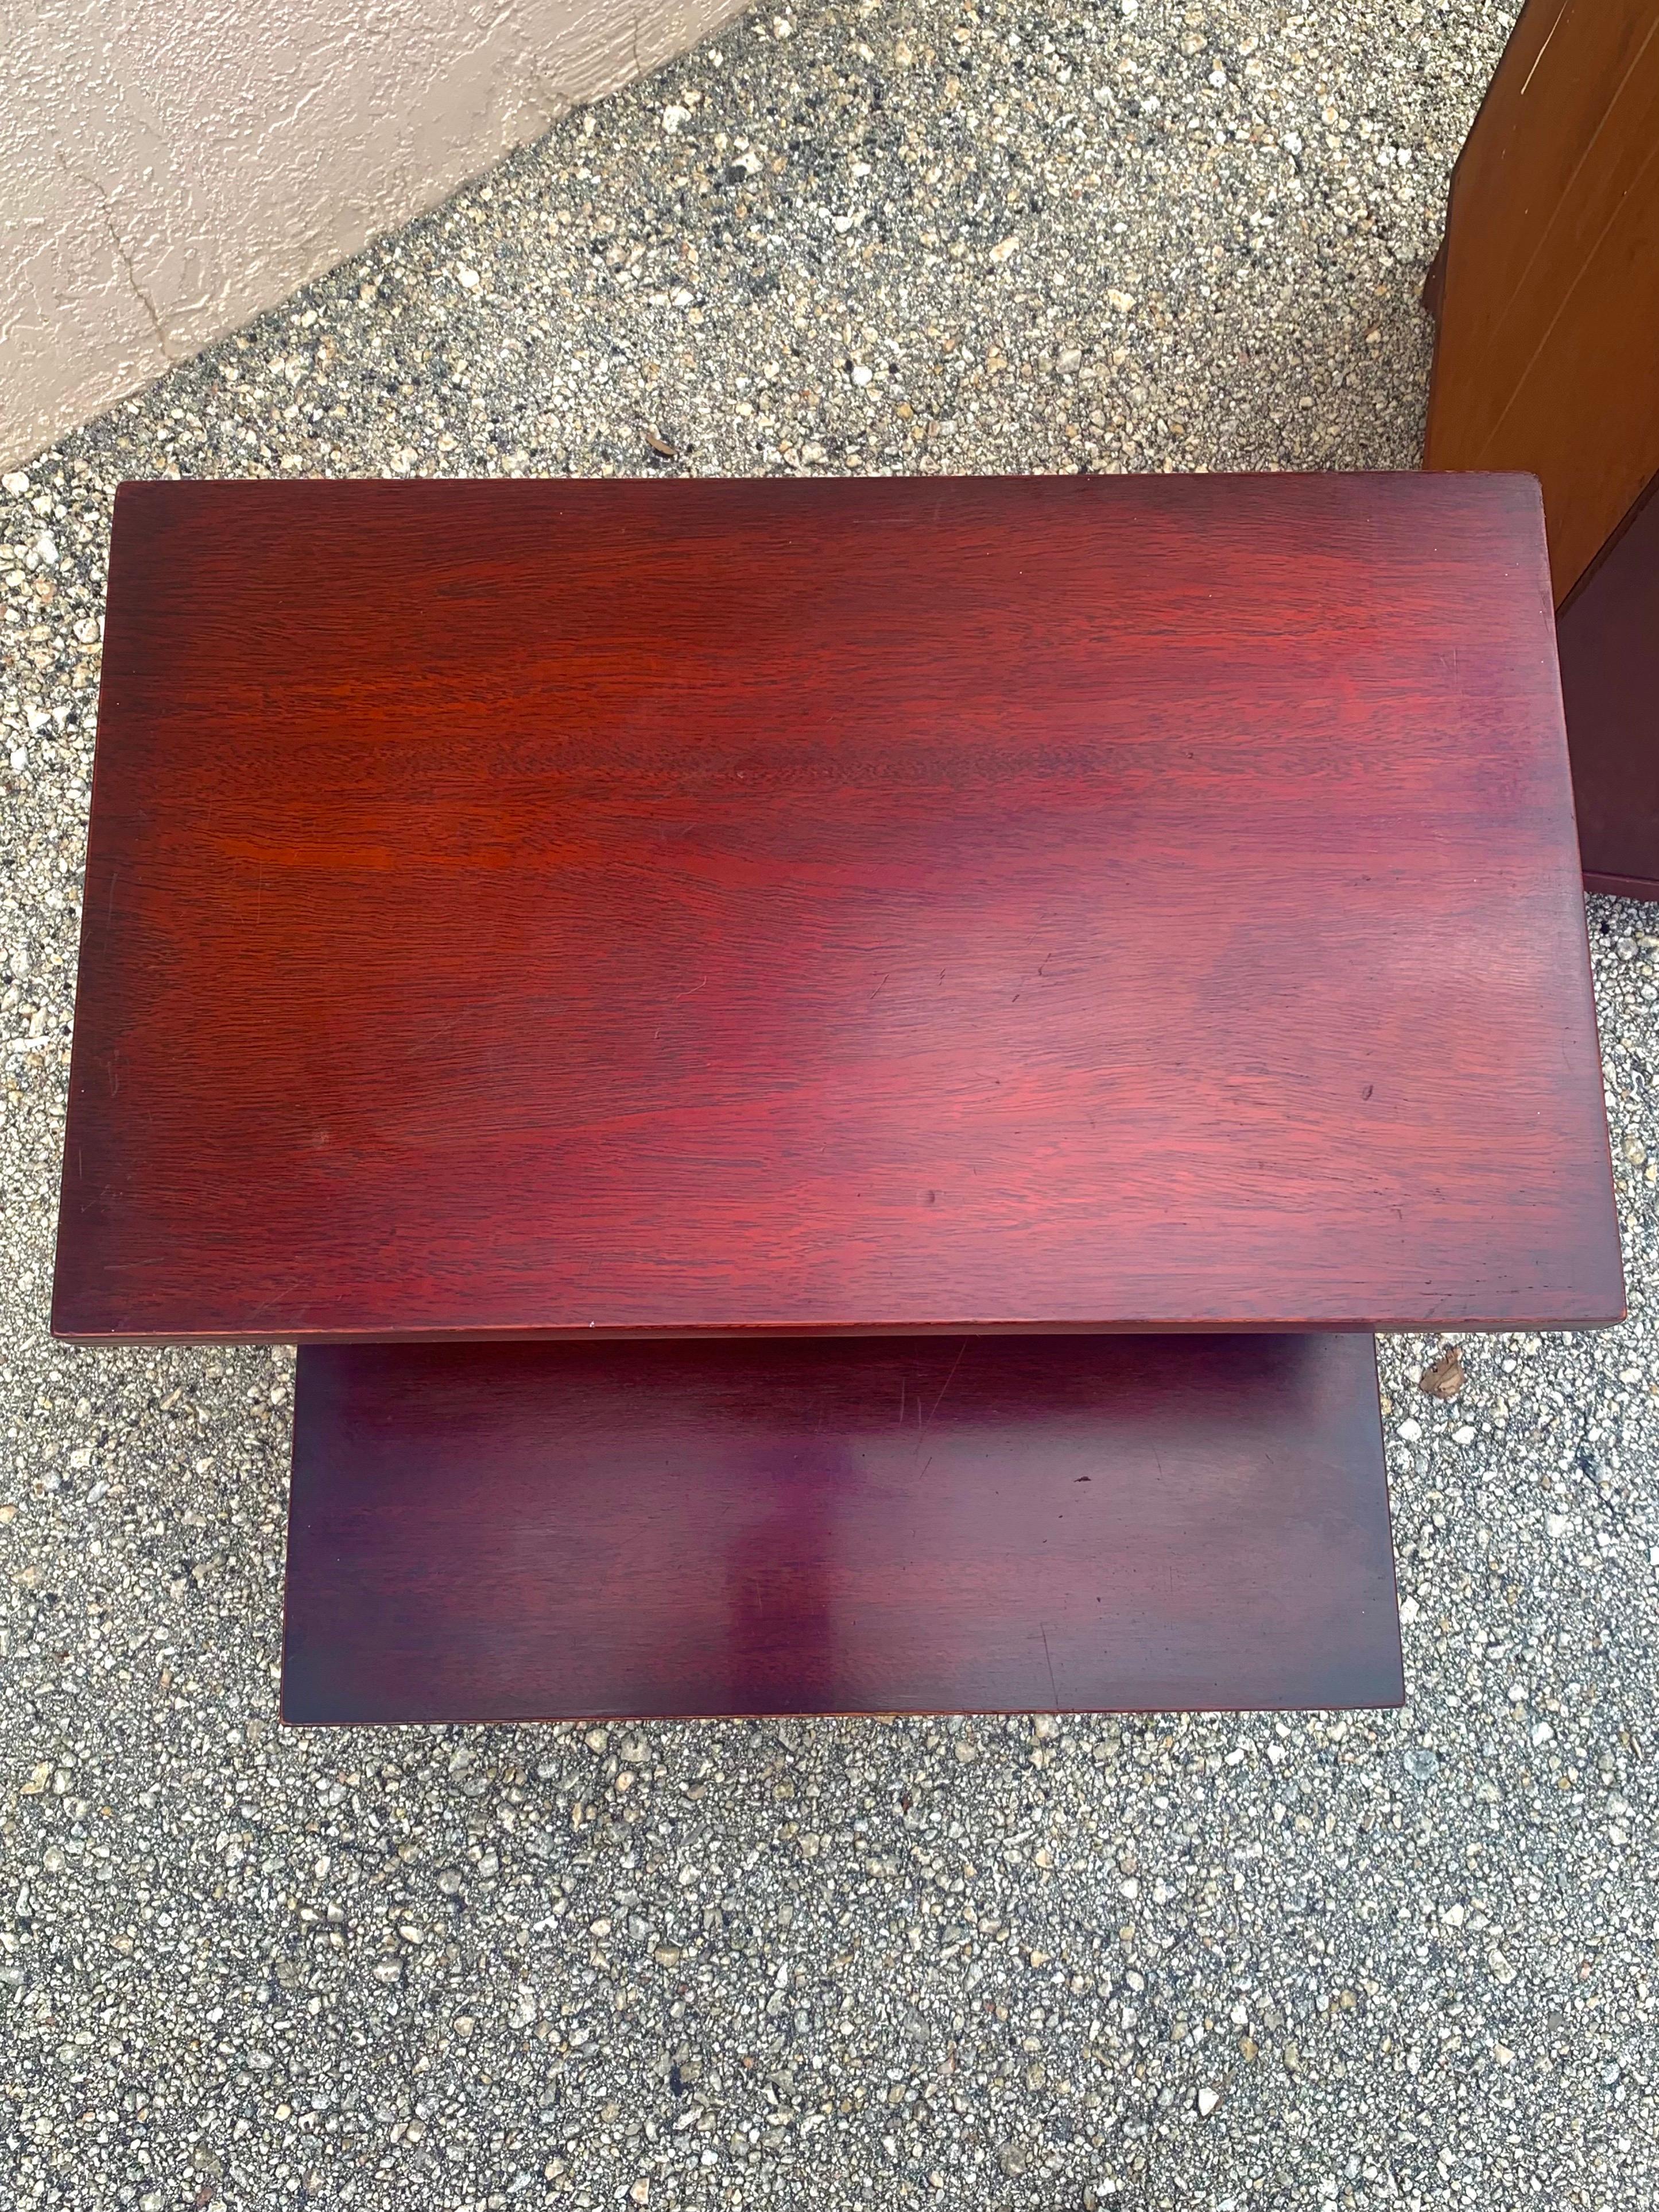 Brass Mid-Century Modern Nightstands by Kent Coffey in Mahogany, a Pair